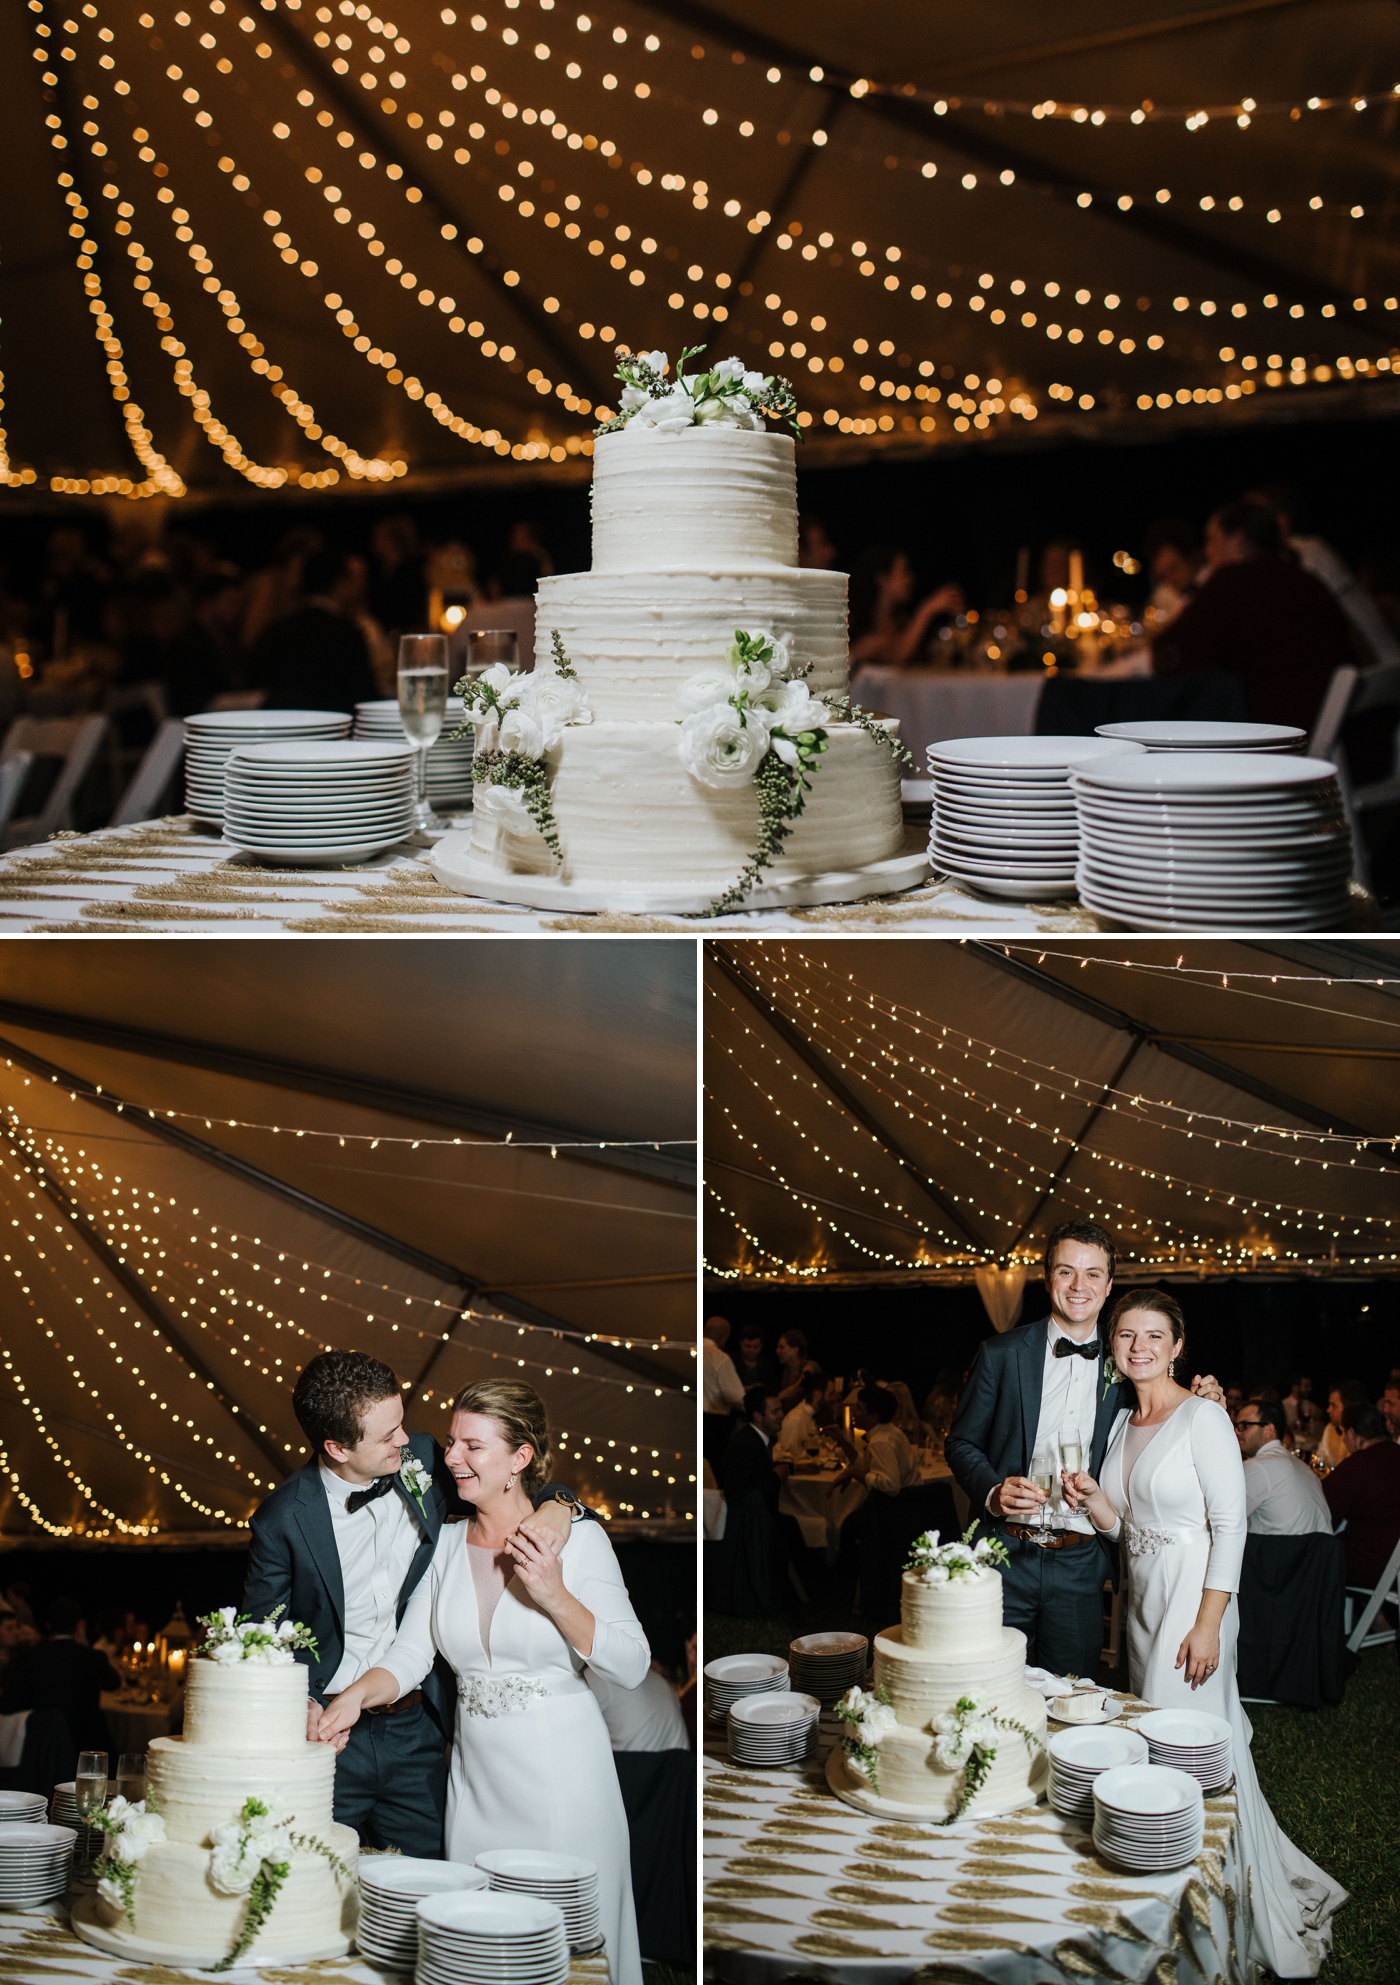 Wedding reception on St. Simons Island at Christ Church Frederica | Izzy and Co. Photography